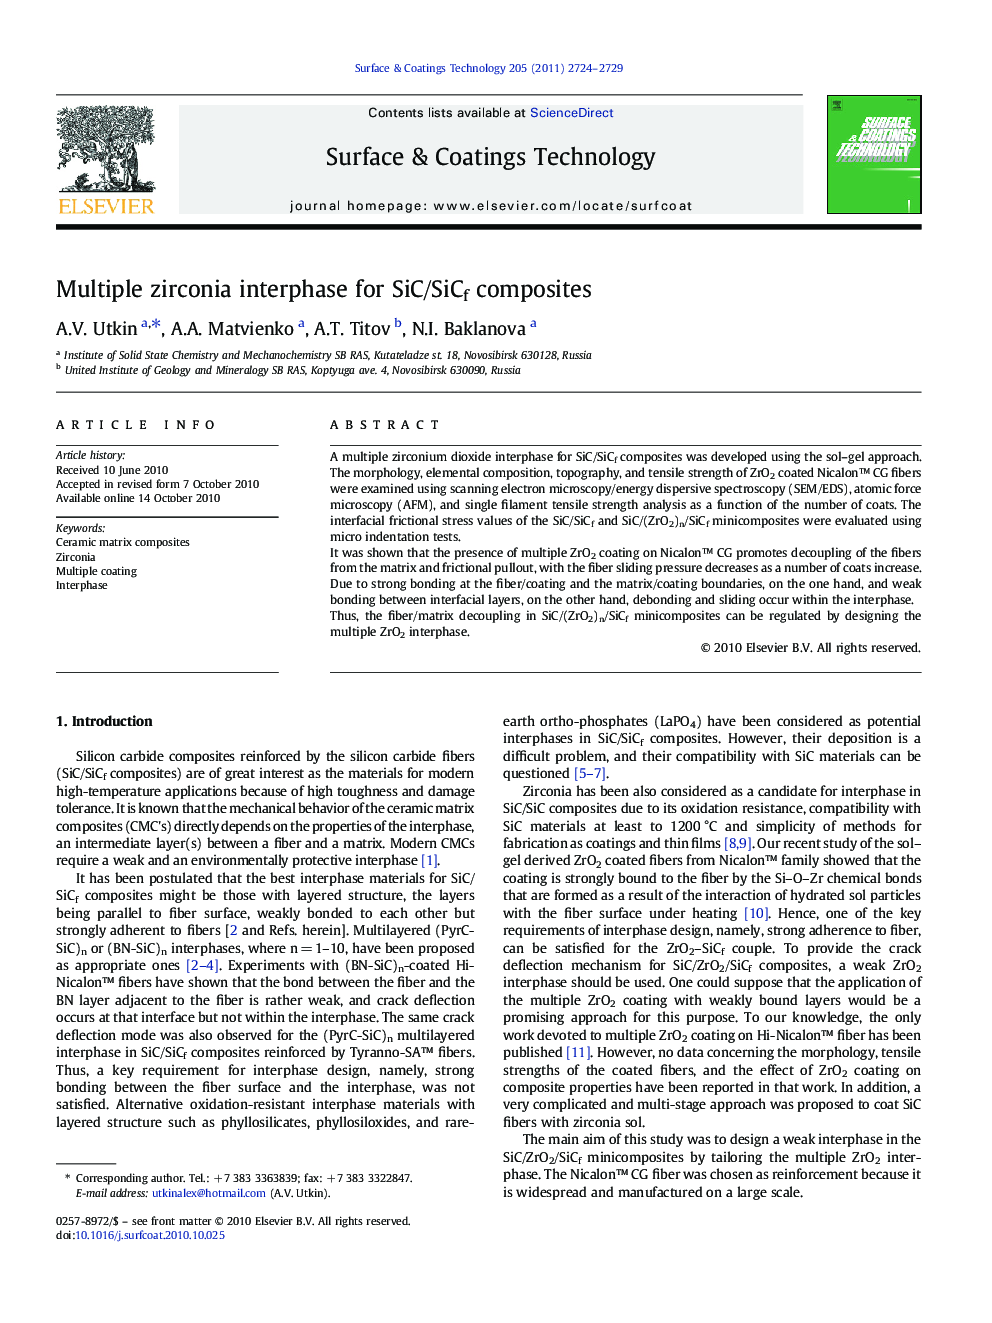 Multiple zirconia interphase for SiC/SiCf composites